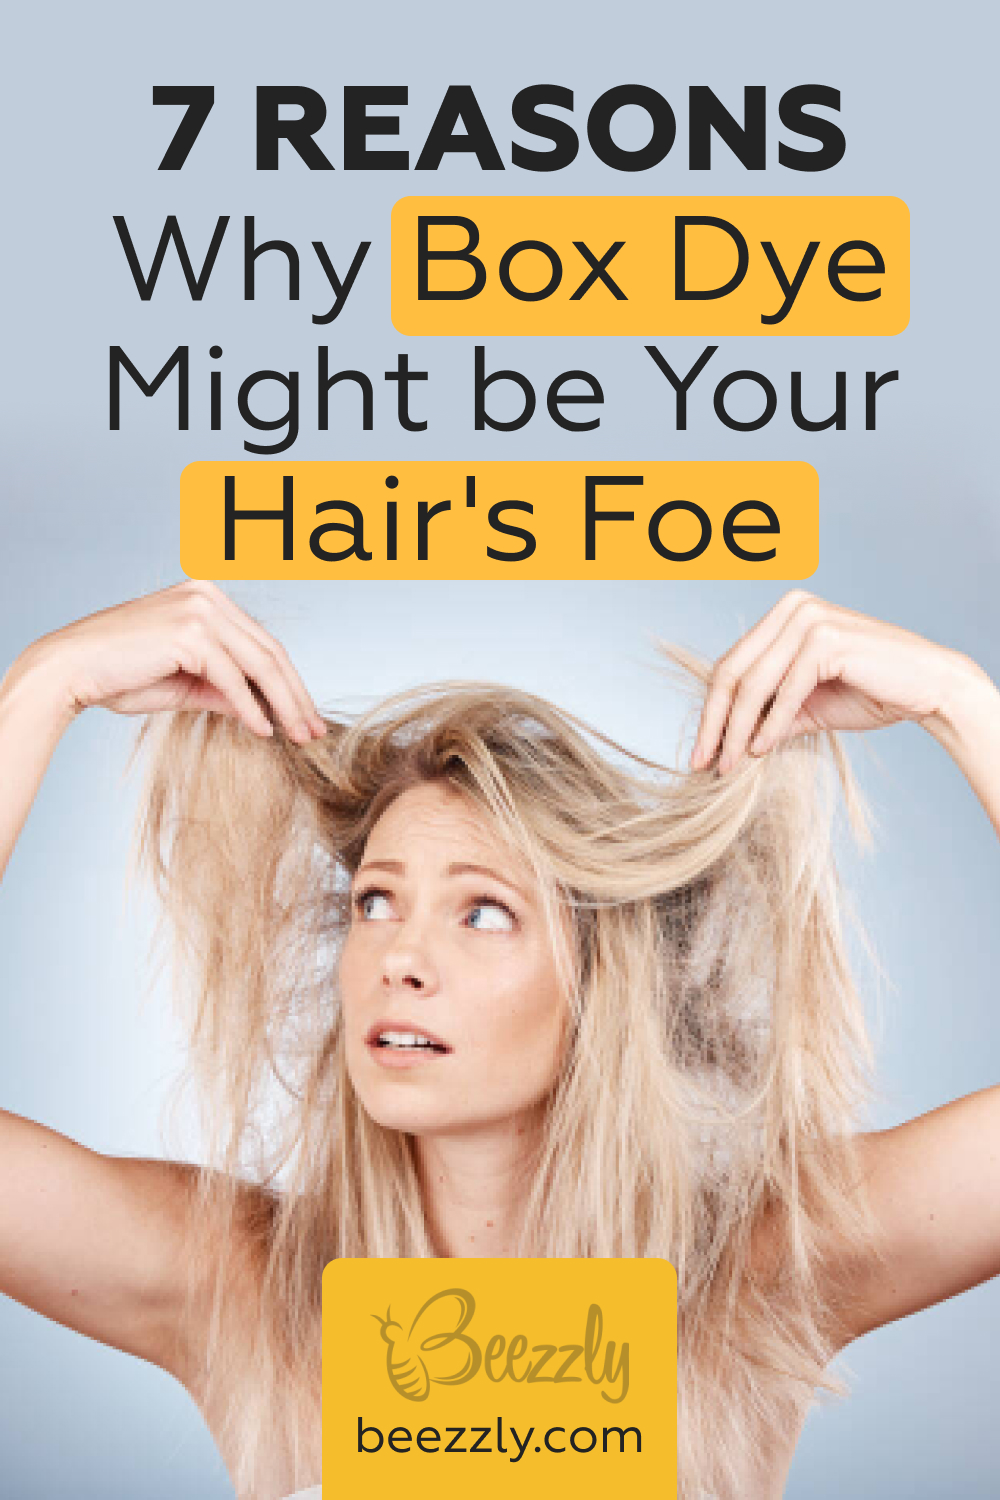 7 Reasons Why Box Dye Might be Your Hair’s Foe